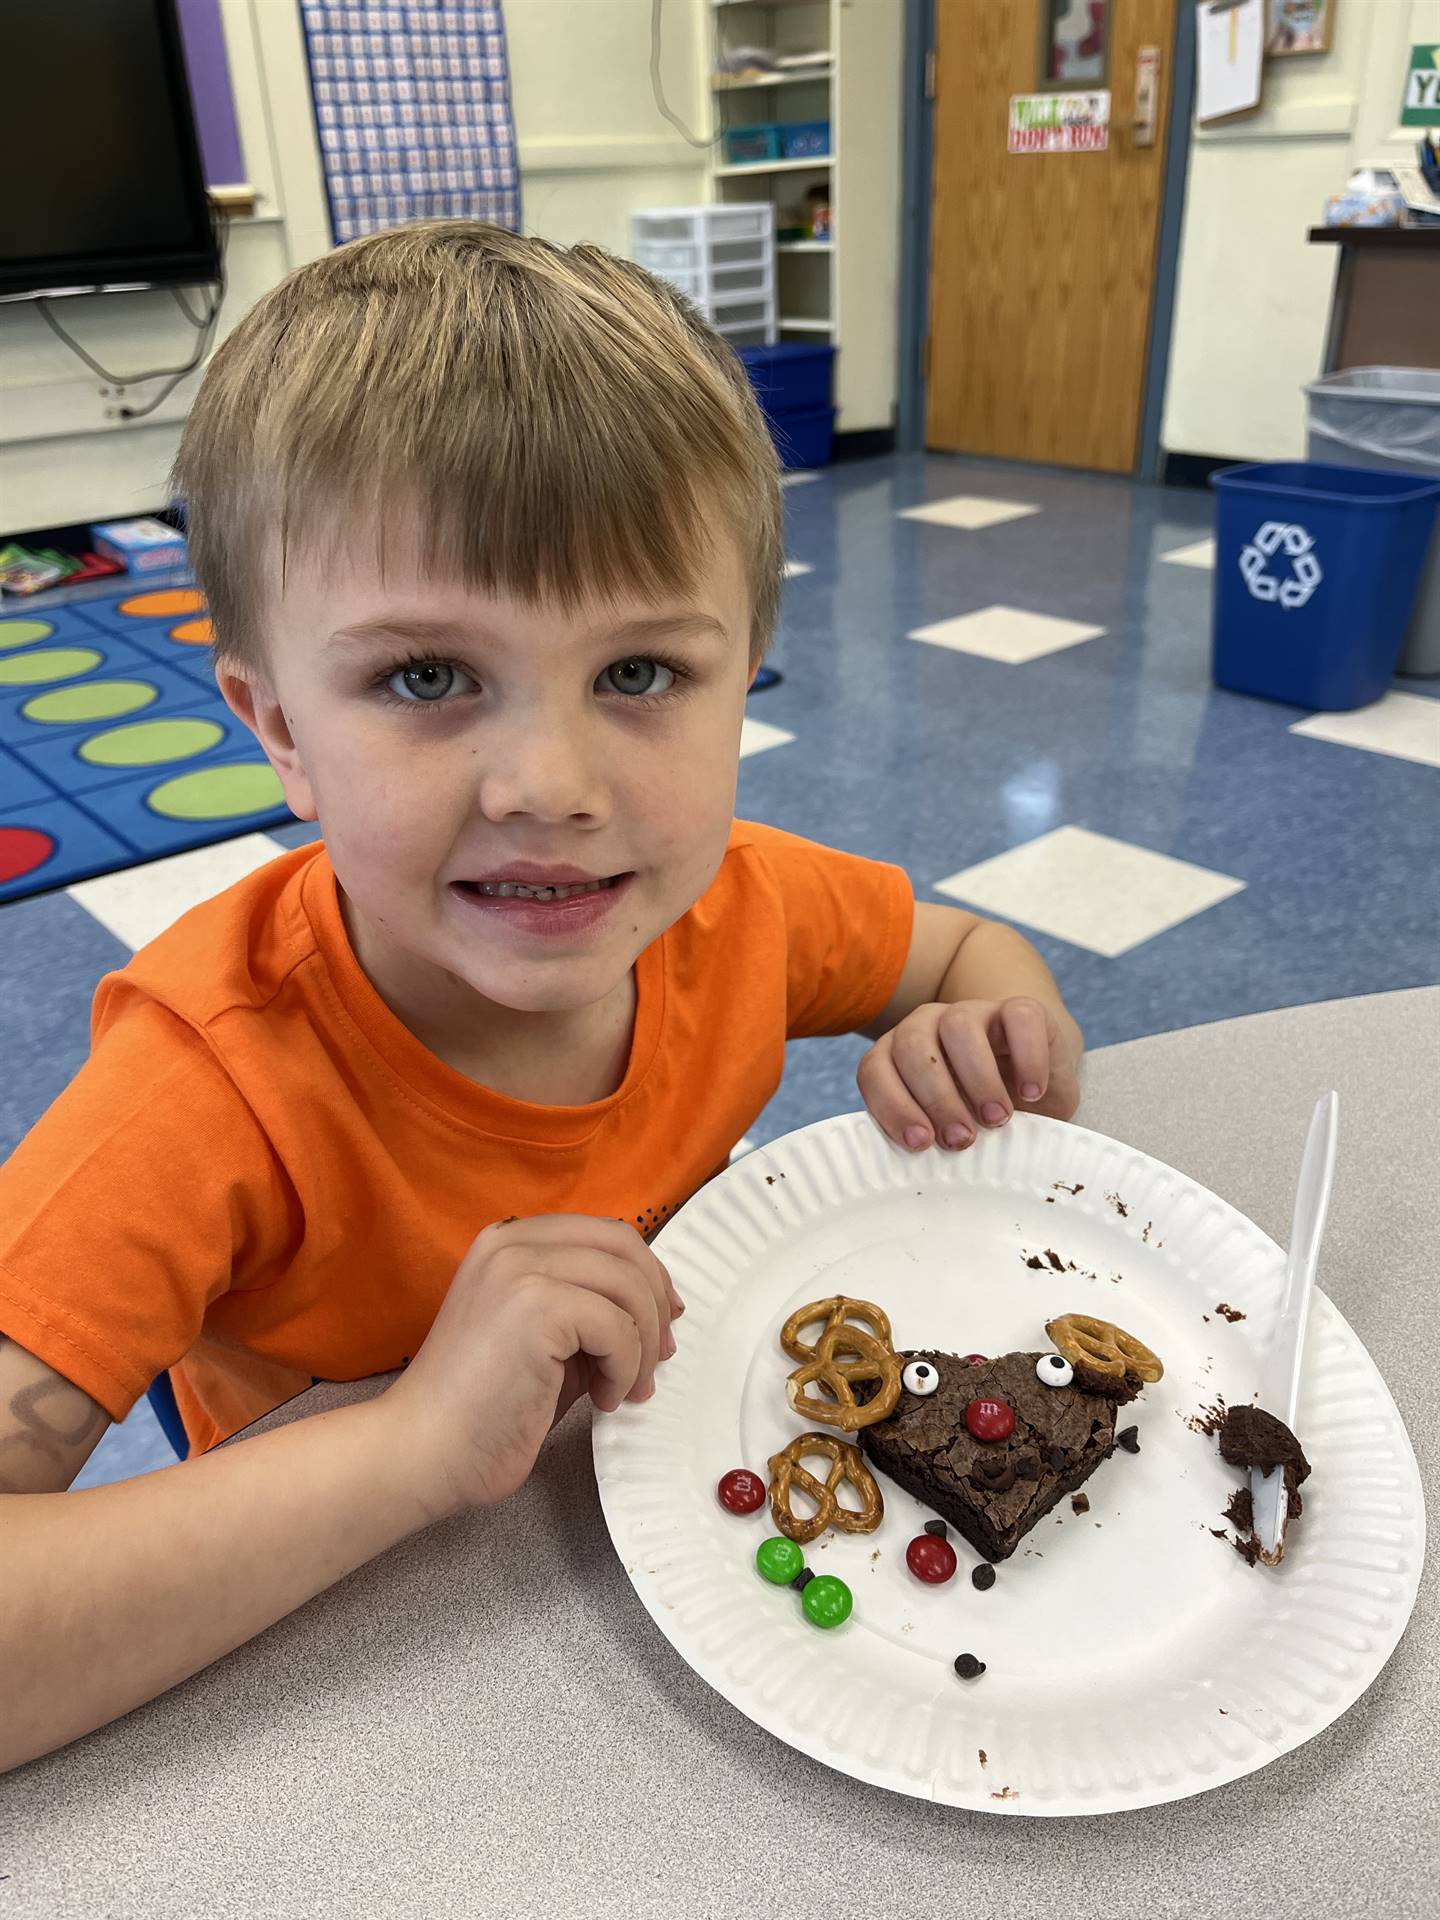 student shows reindeer on plate made out of food